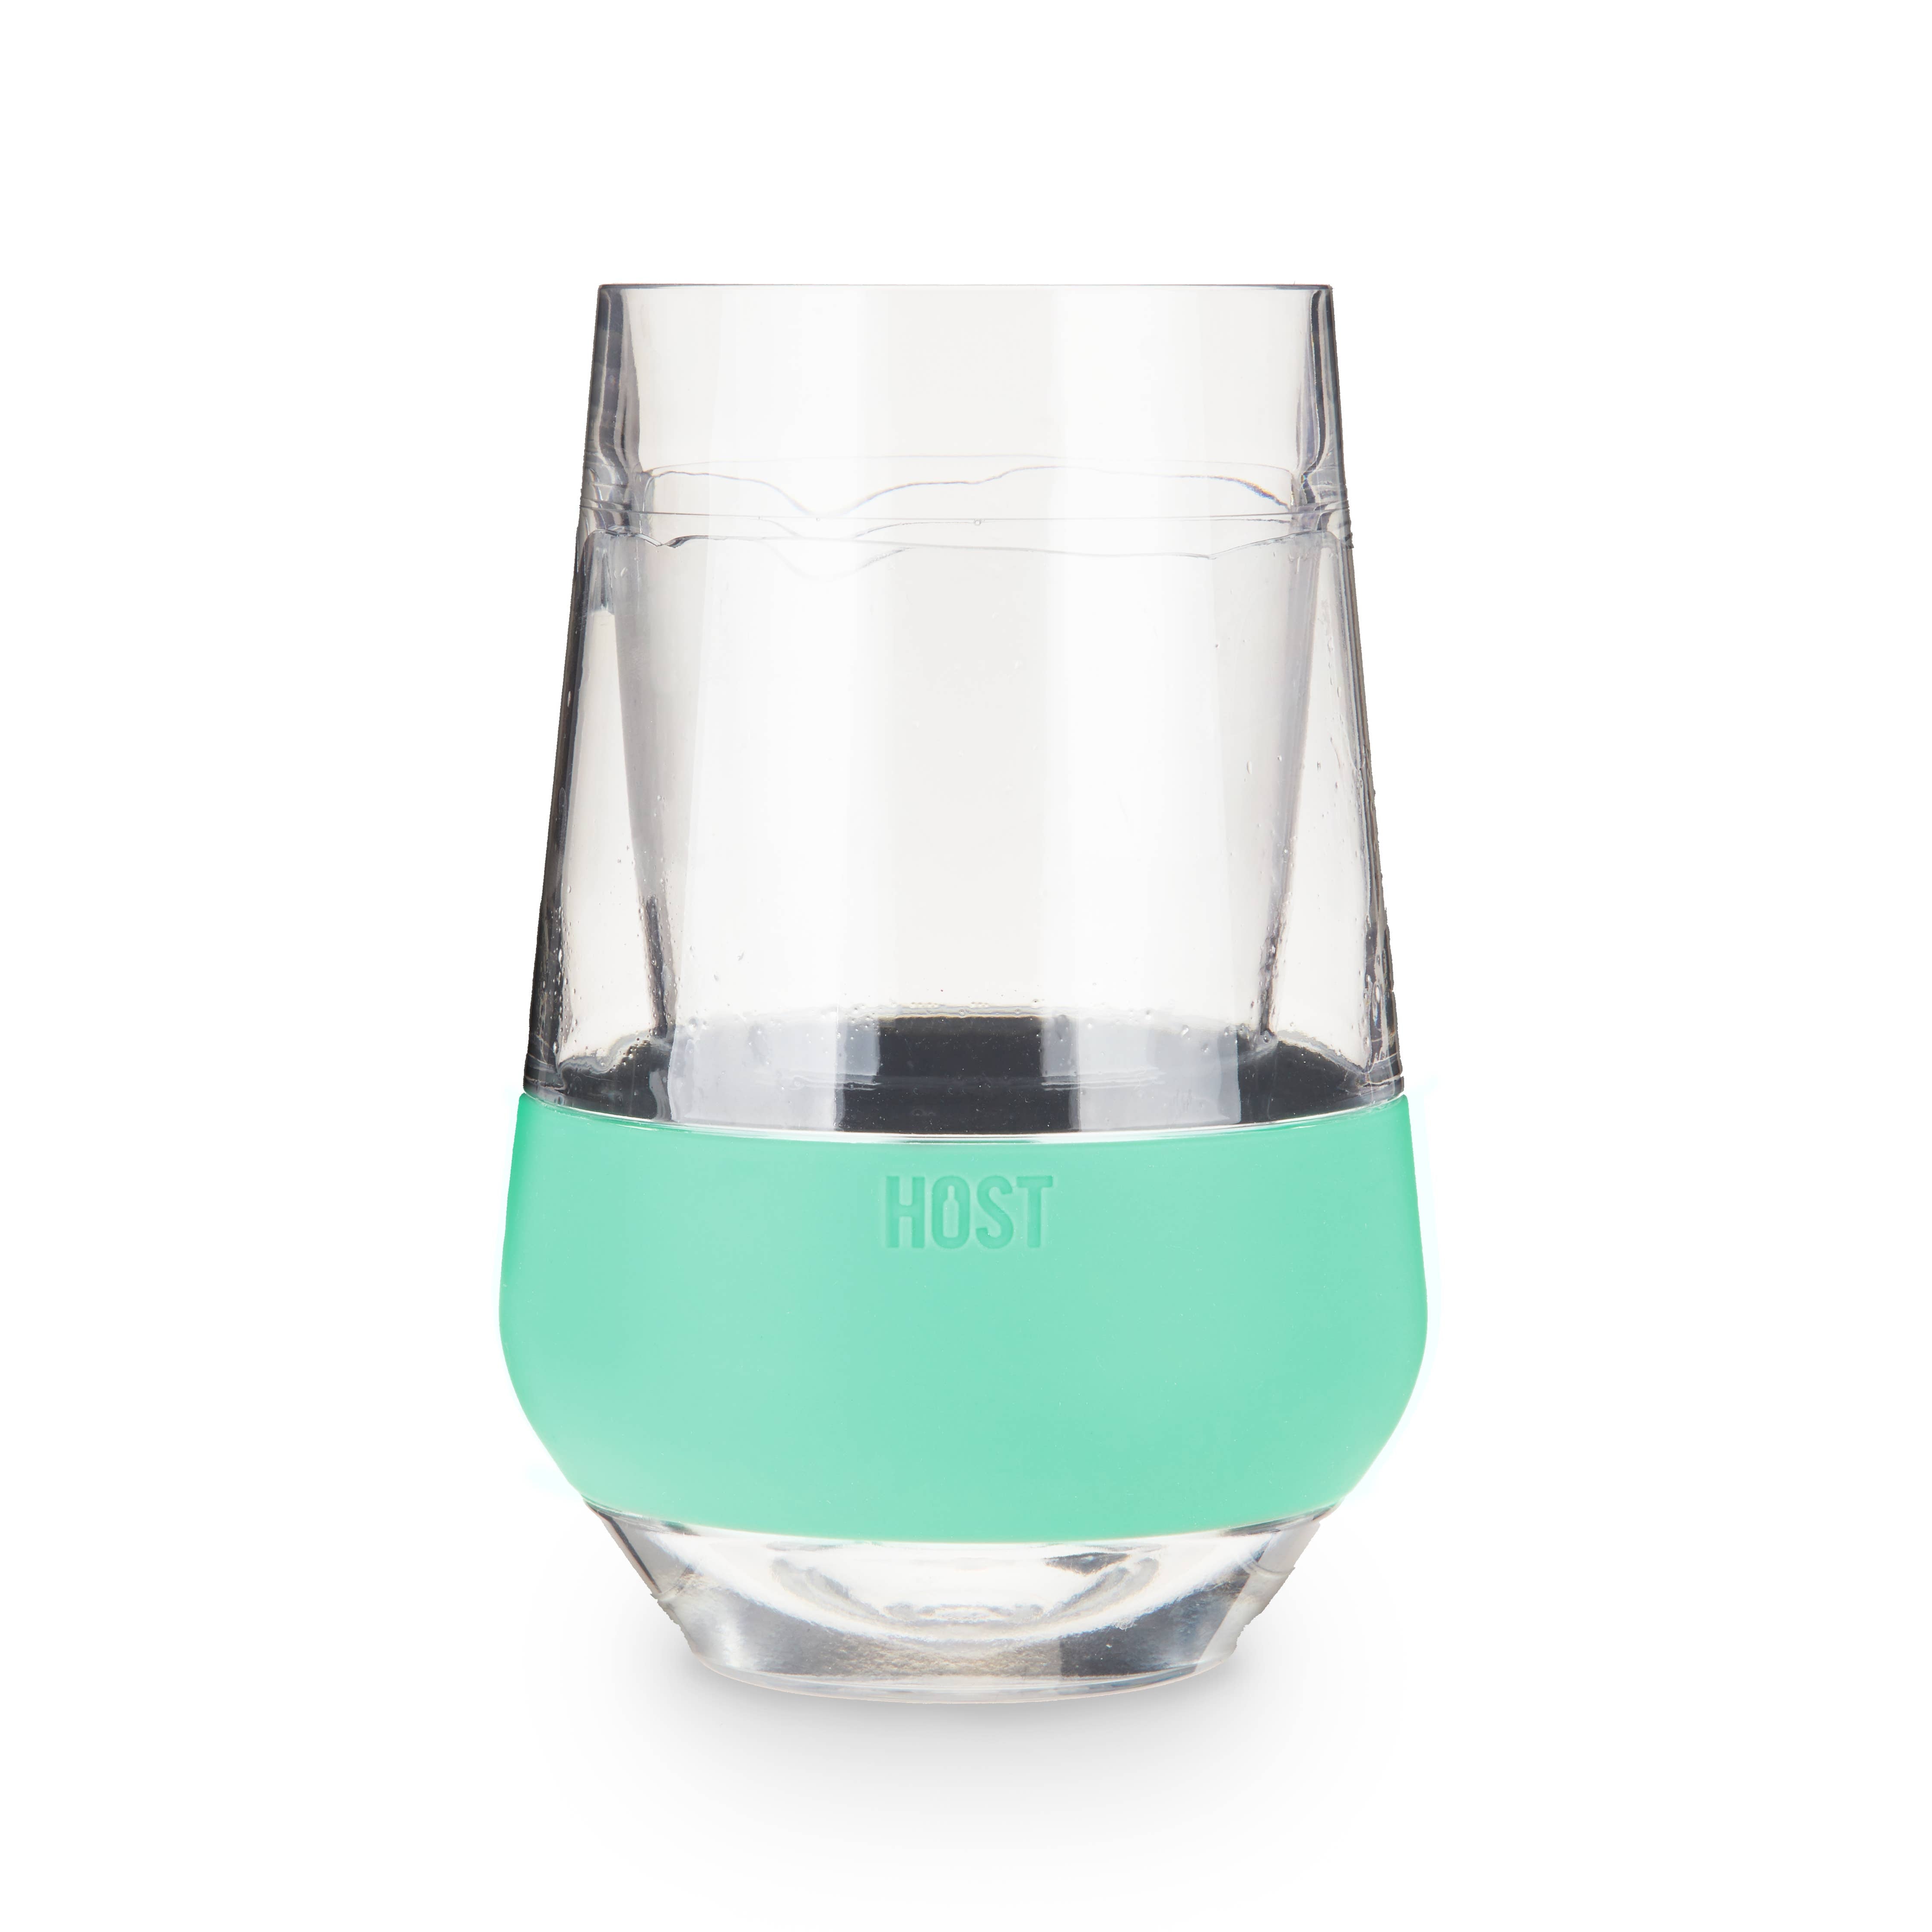 HOST - Wine FREEZE™ XL Cooling Cup in Mint